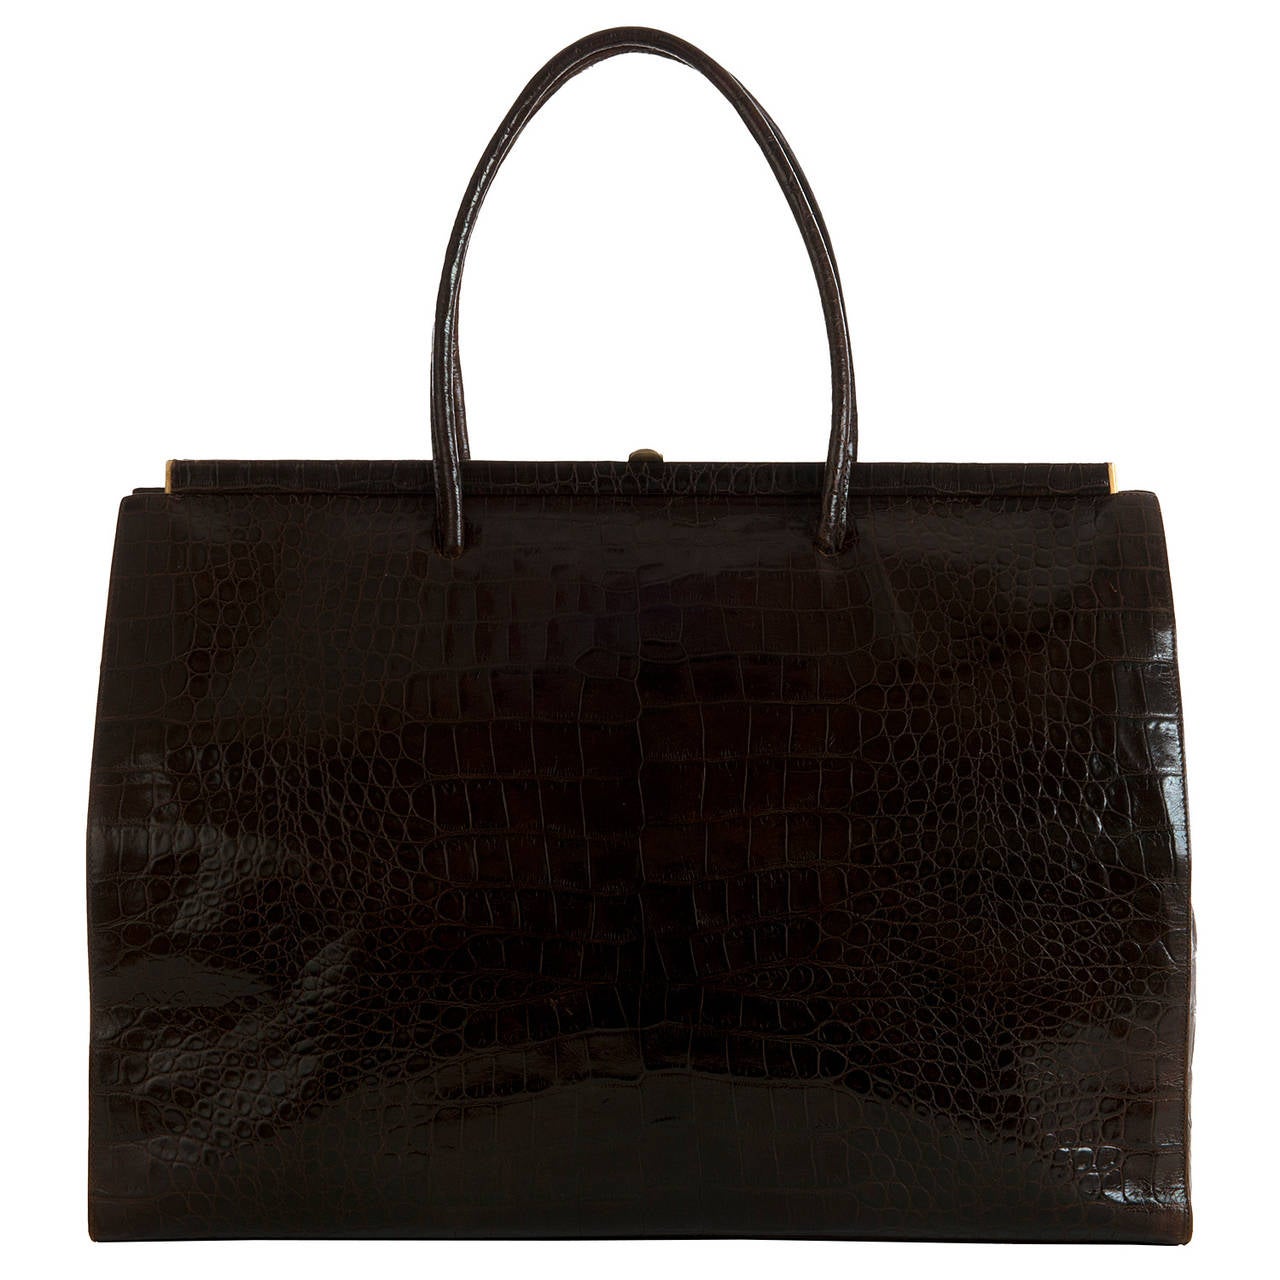 A classic, uber smart, Choc. Brown, 'Faux-Croc' Tote Handbag by Jaeger. This absolutely cavernous bag with it's goldtone fittings has a zipped interior pocket, and is perfect for those mega shopping trips or even a weekend away.